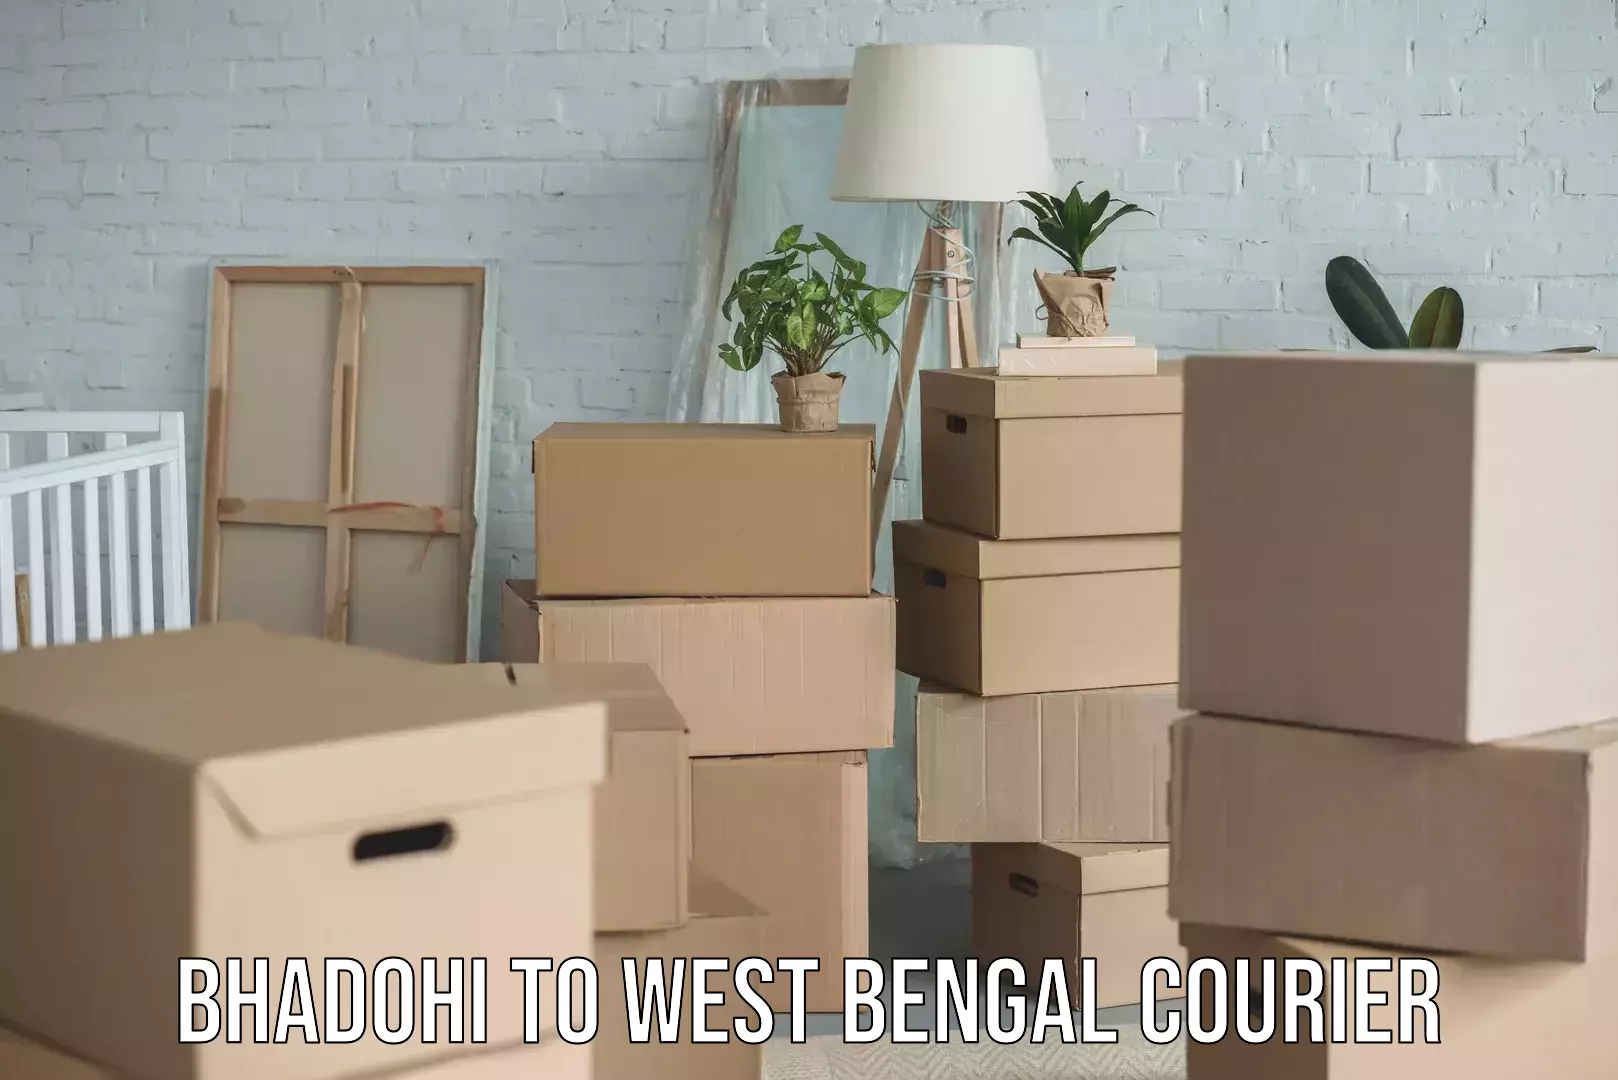 Sustainable courier practices Bhadohi to West Bengal